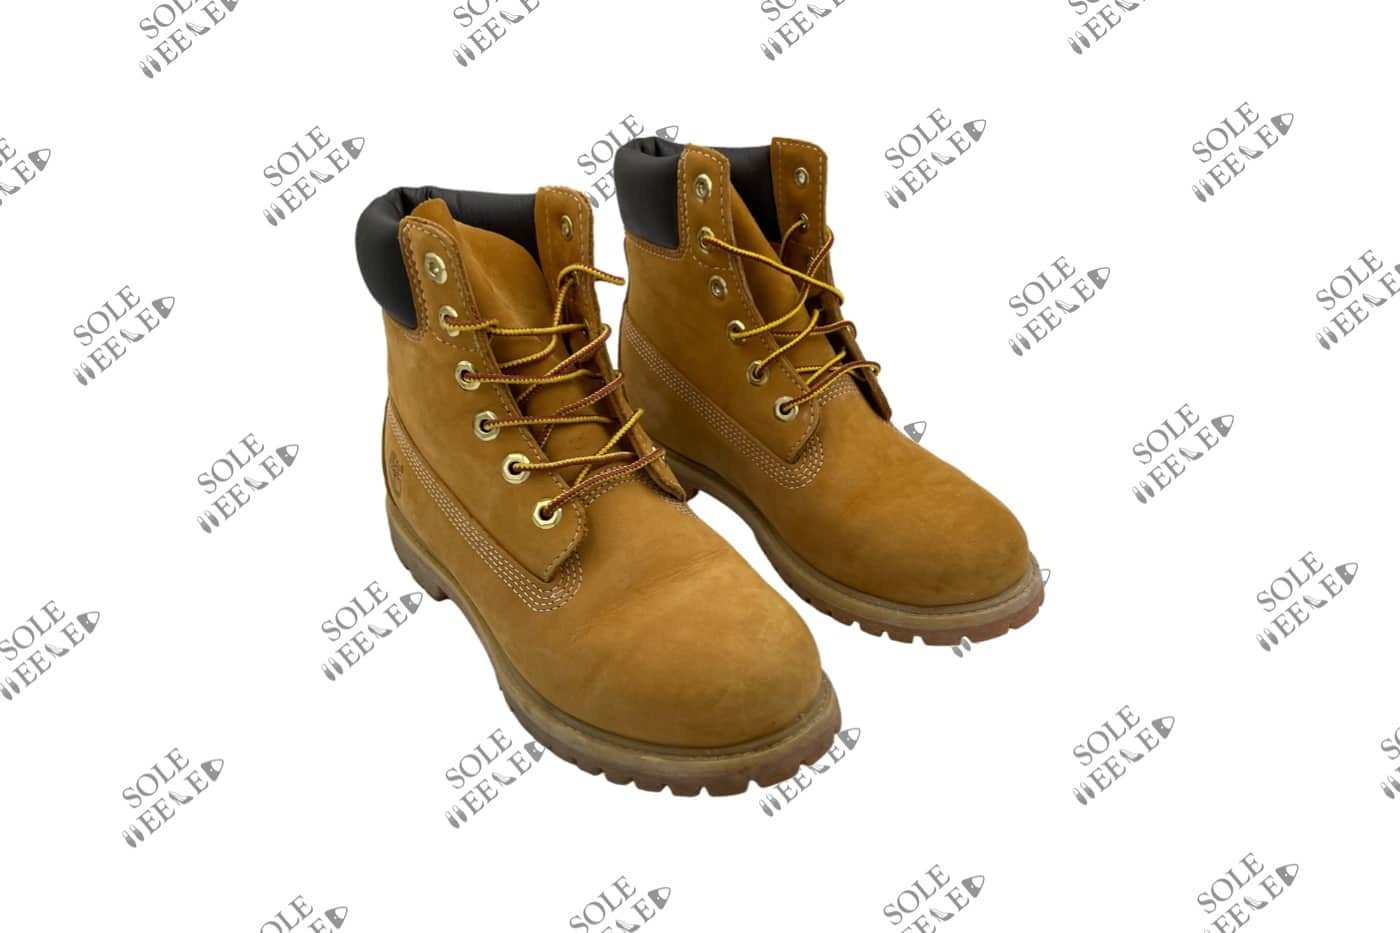 Timberland Boot Cleaning & Treatment — SoleHeeled